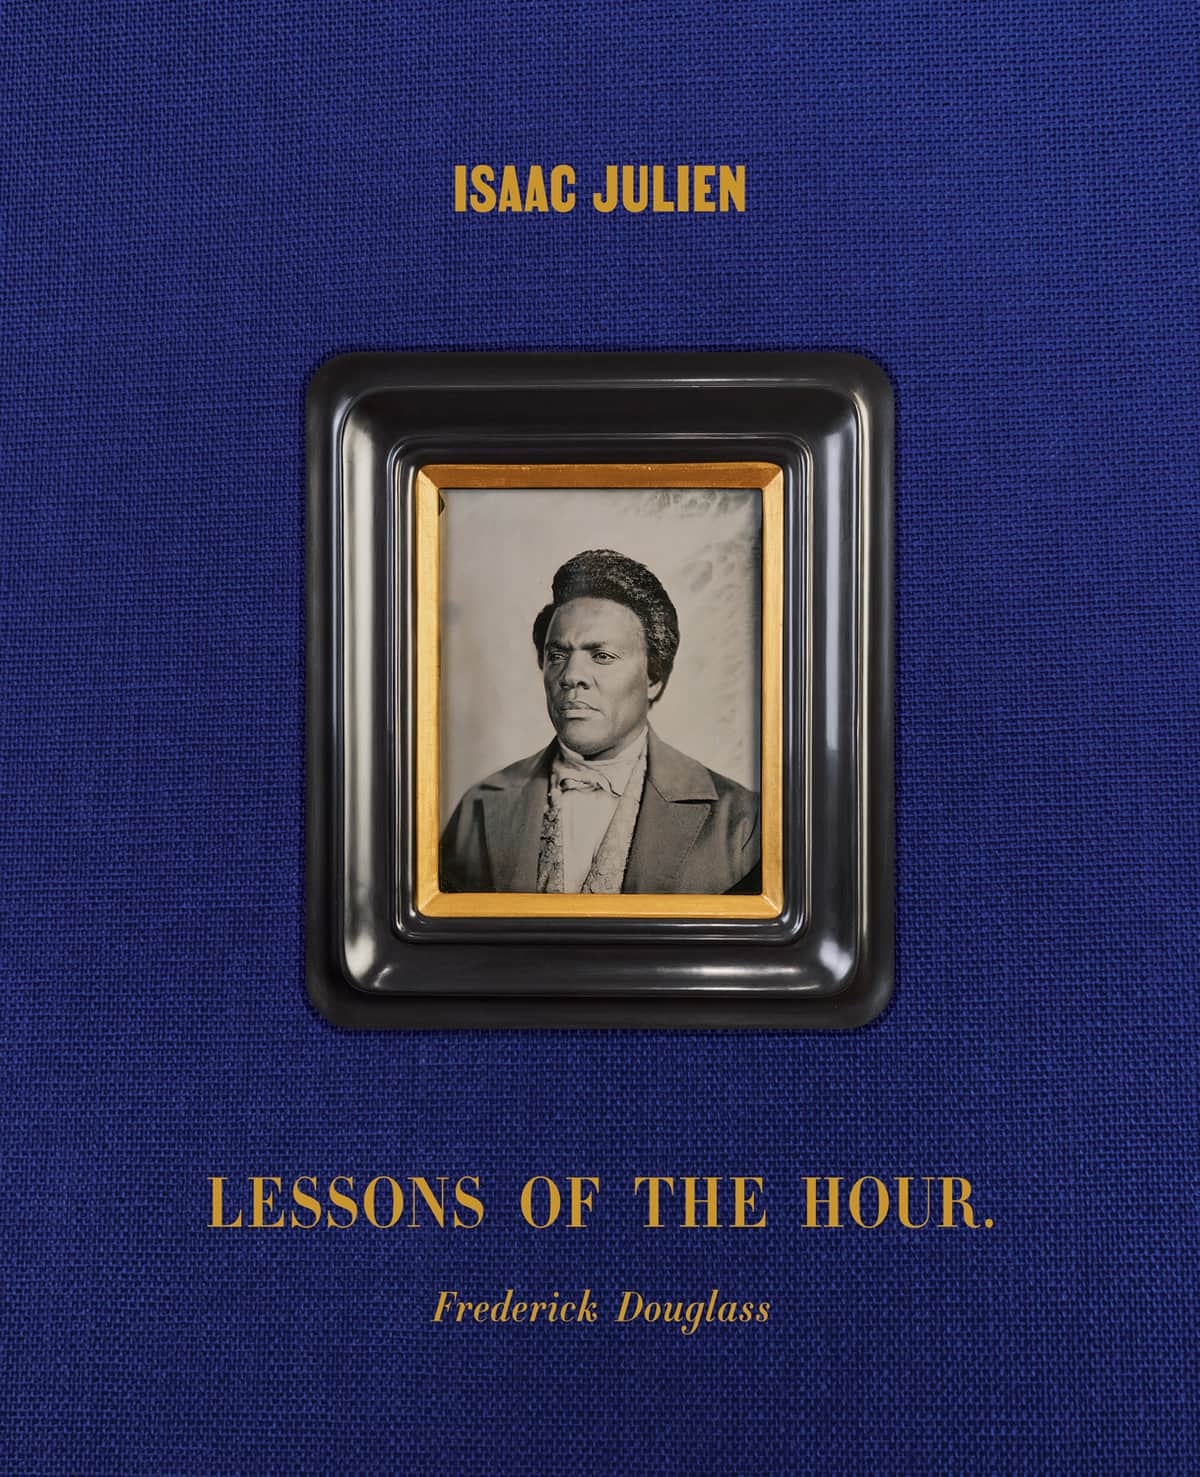 Isaac Julien: Lessons of the Hour – Frederick Douglass - Book Review